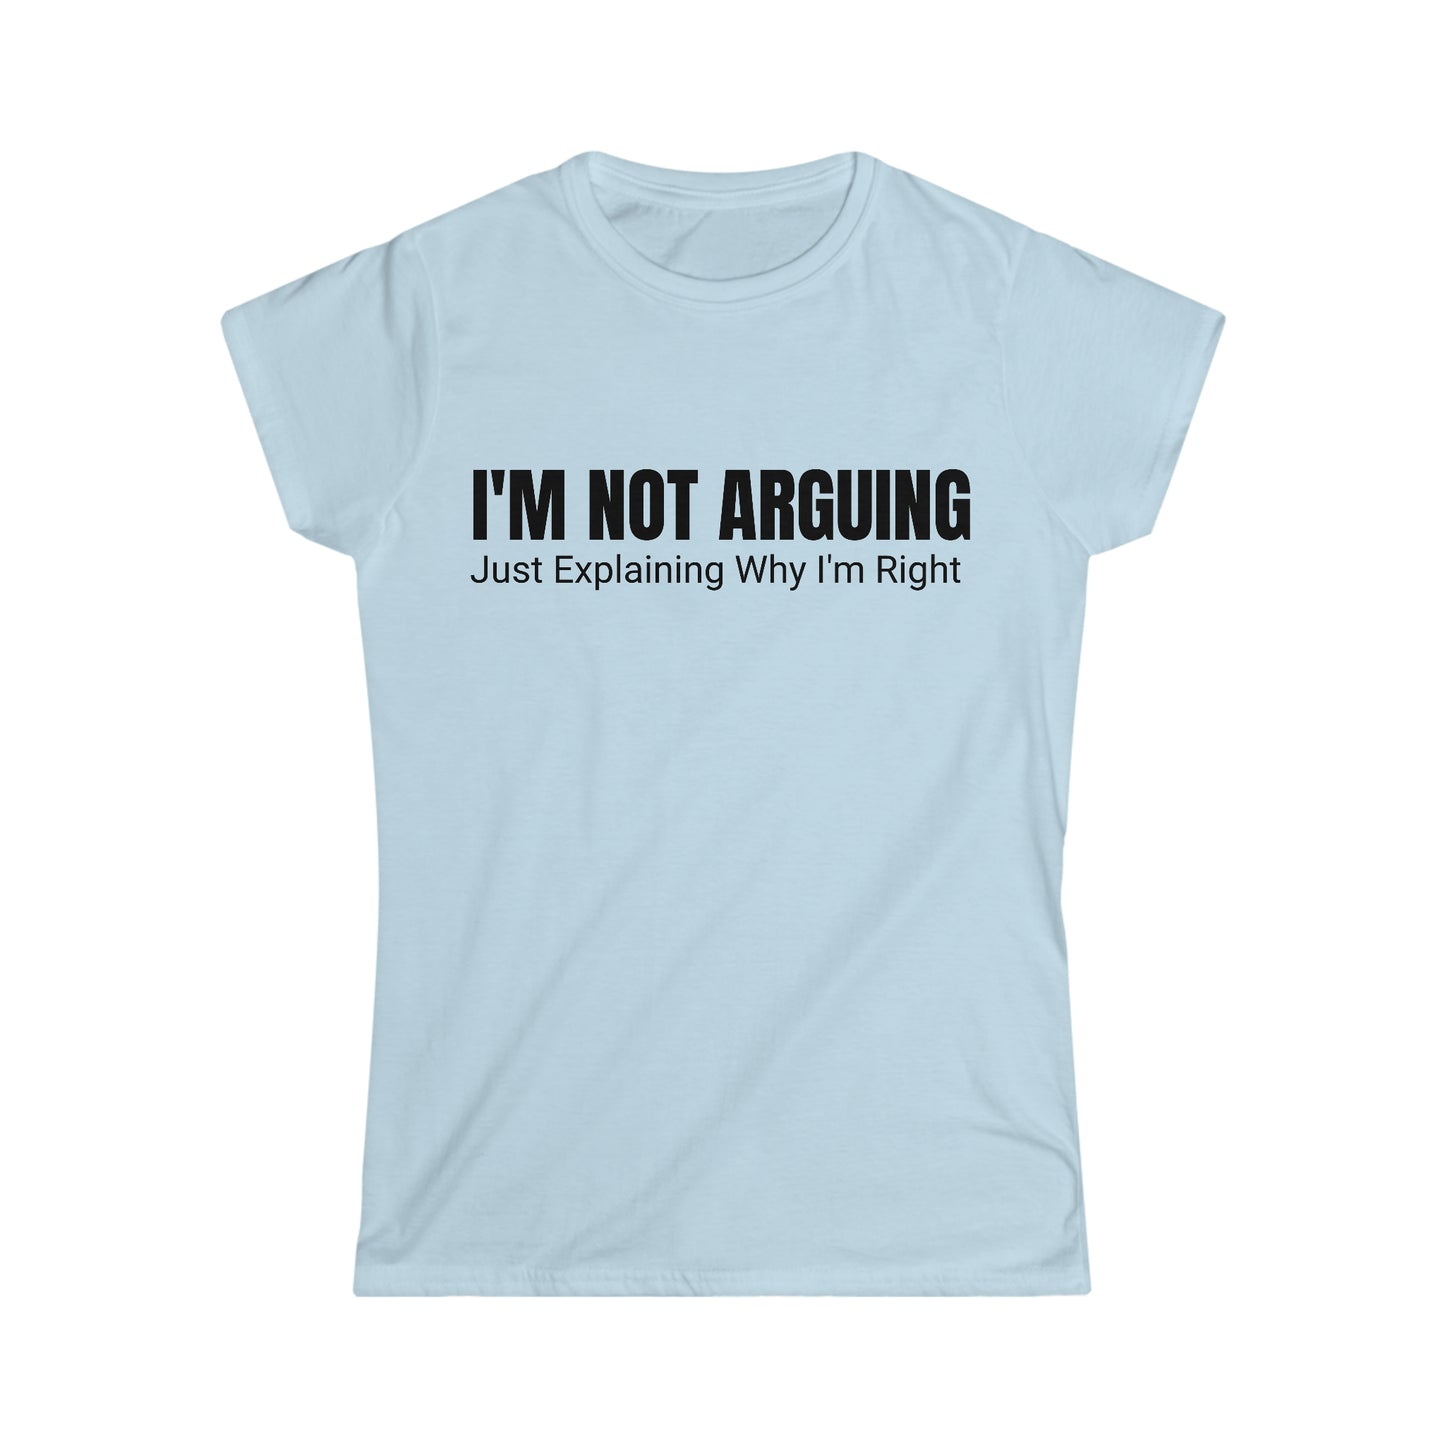 Women Apparel (I'm Not Arguing/ Women's Softstyle Tee)